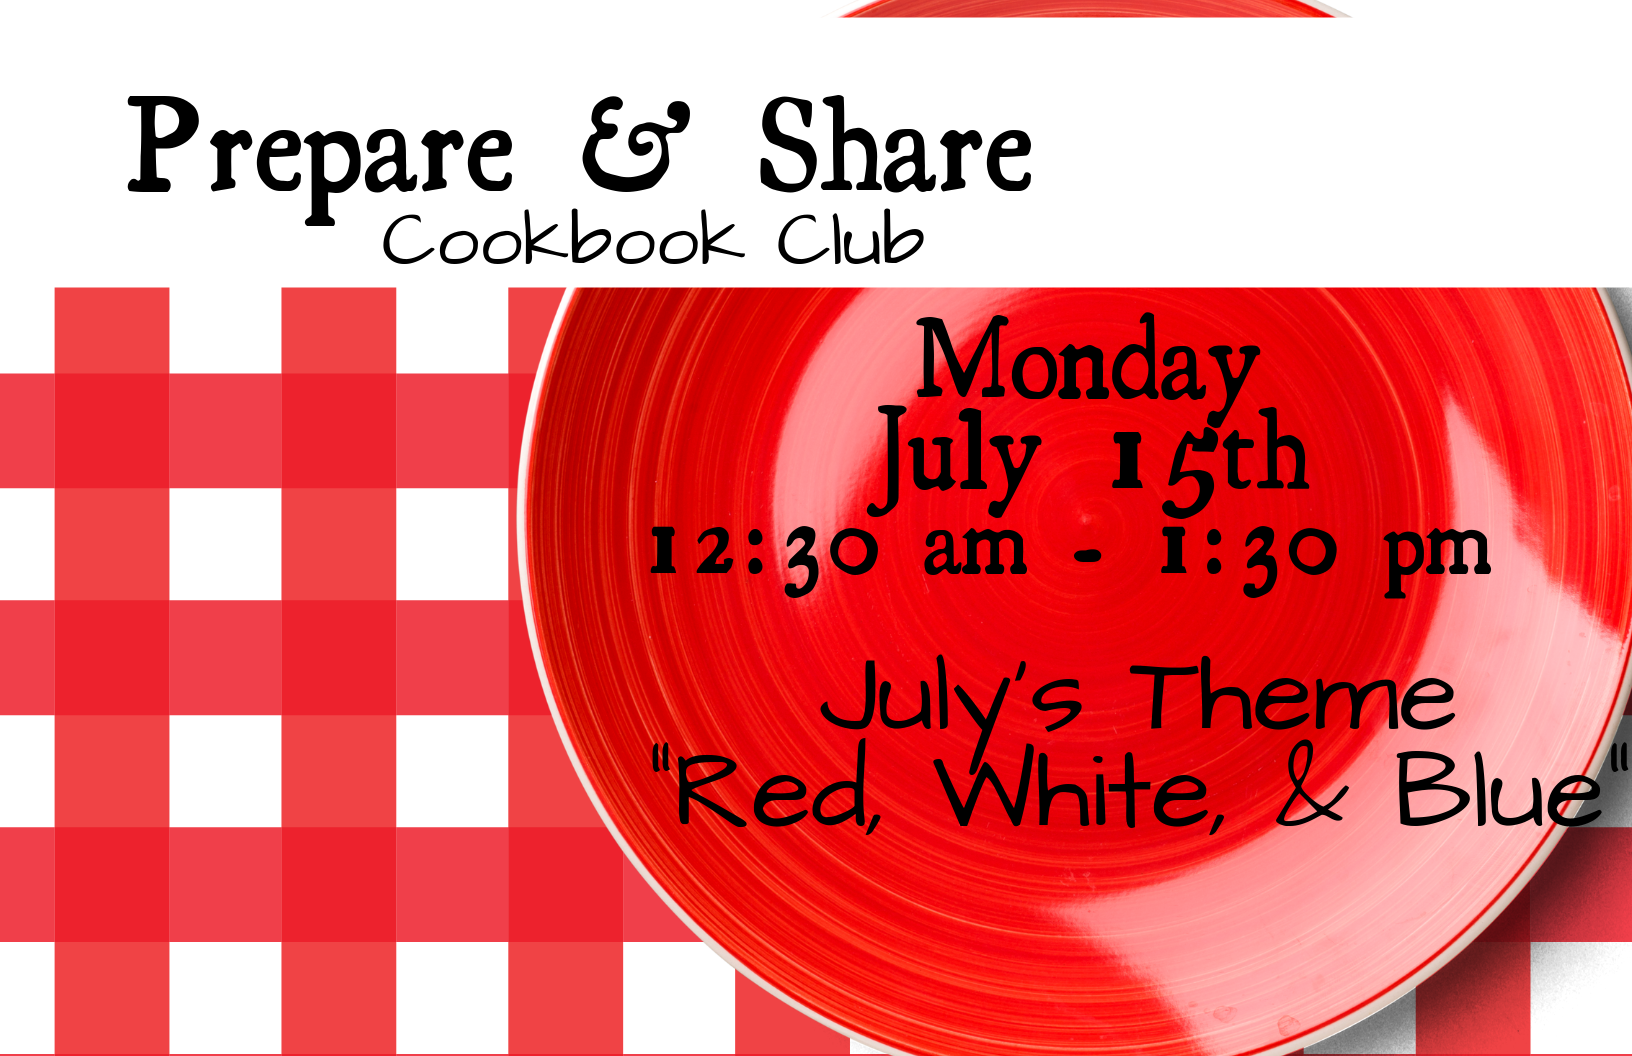 Prepare & Share Cookbook Club - July "Red, White, and Blue"